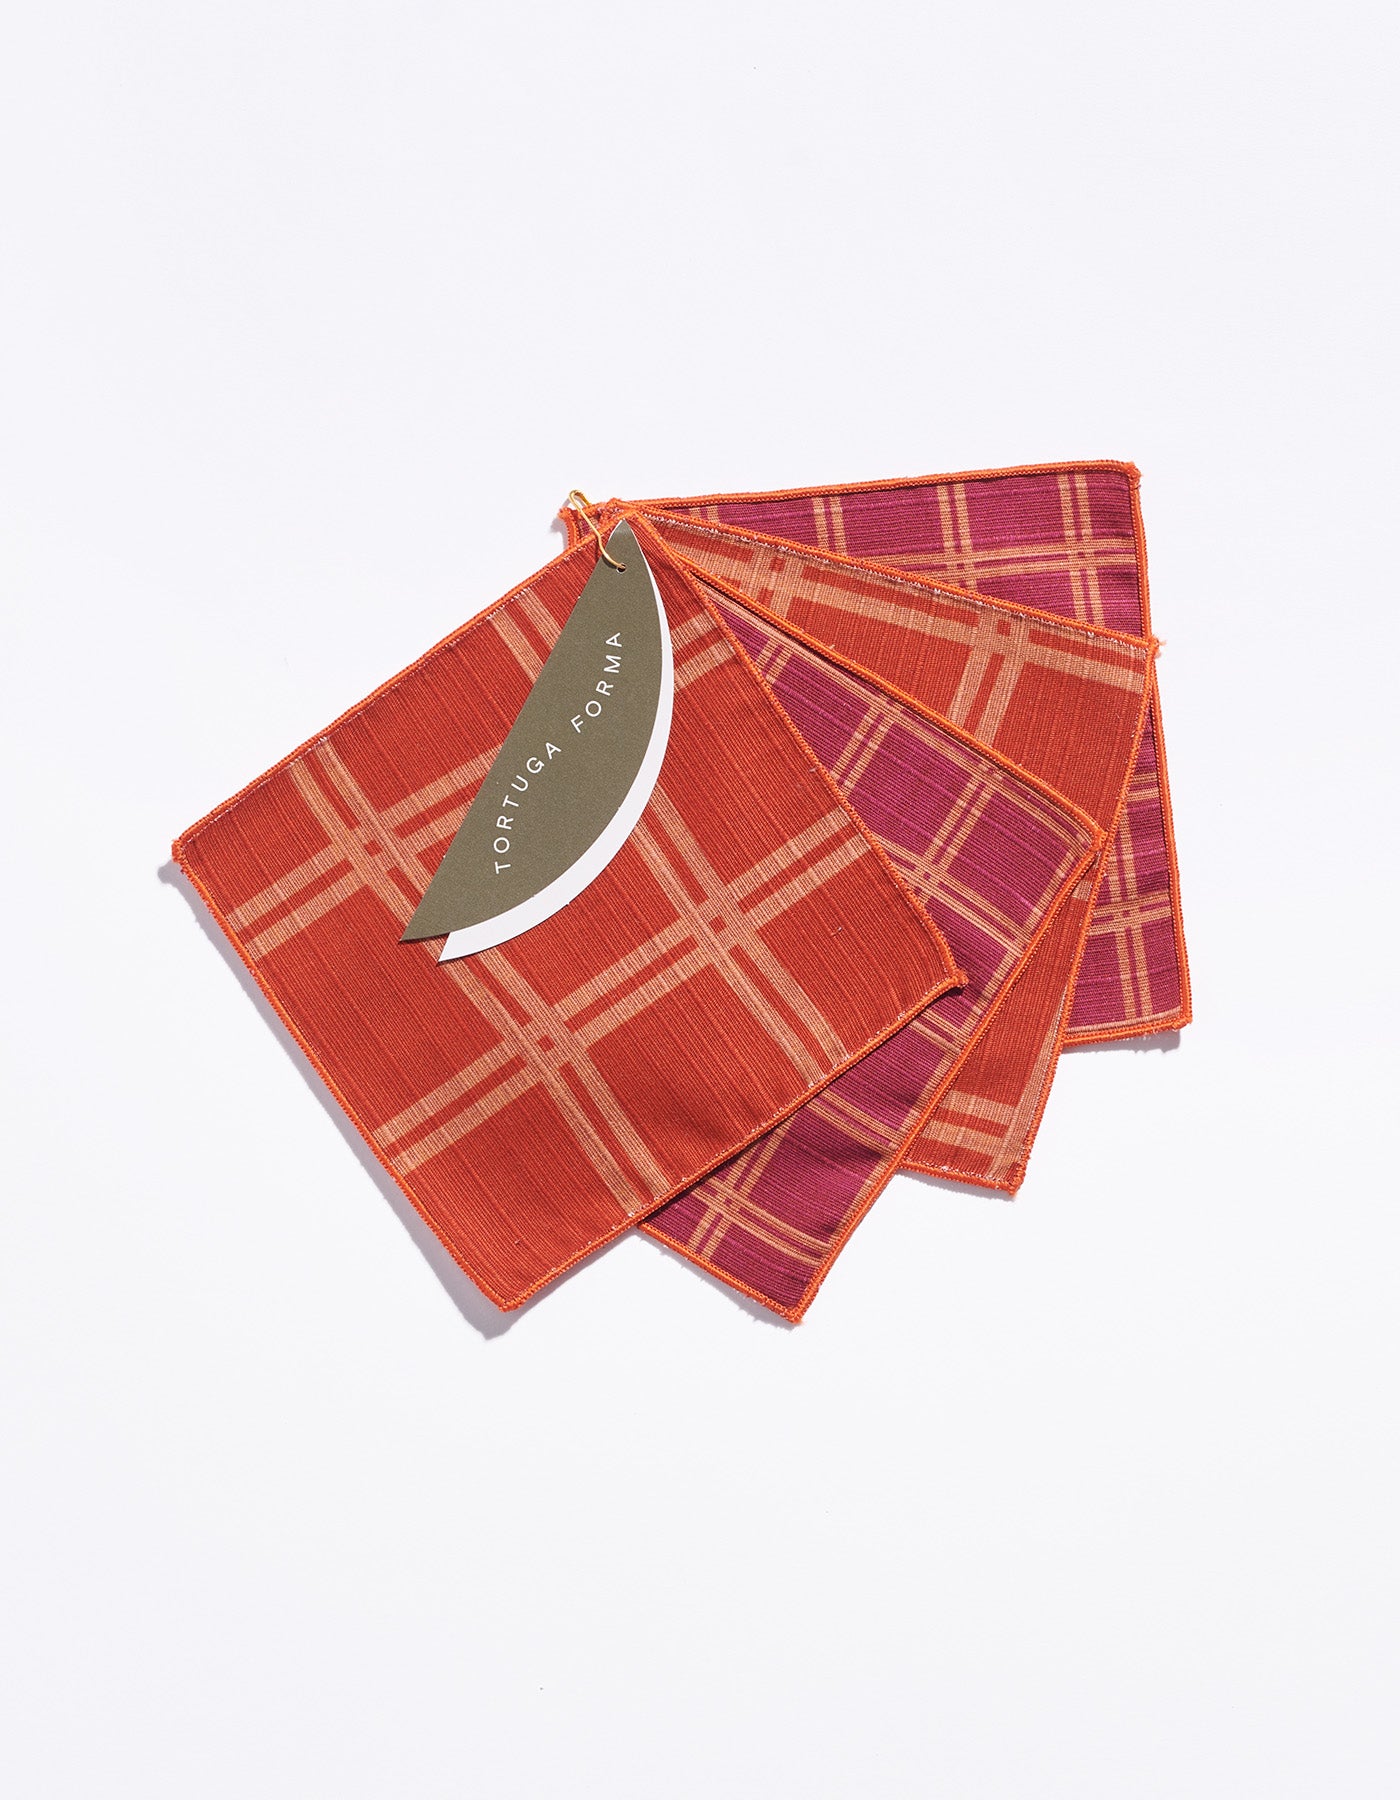 Cocktail Napkins Double Sided Grid